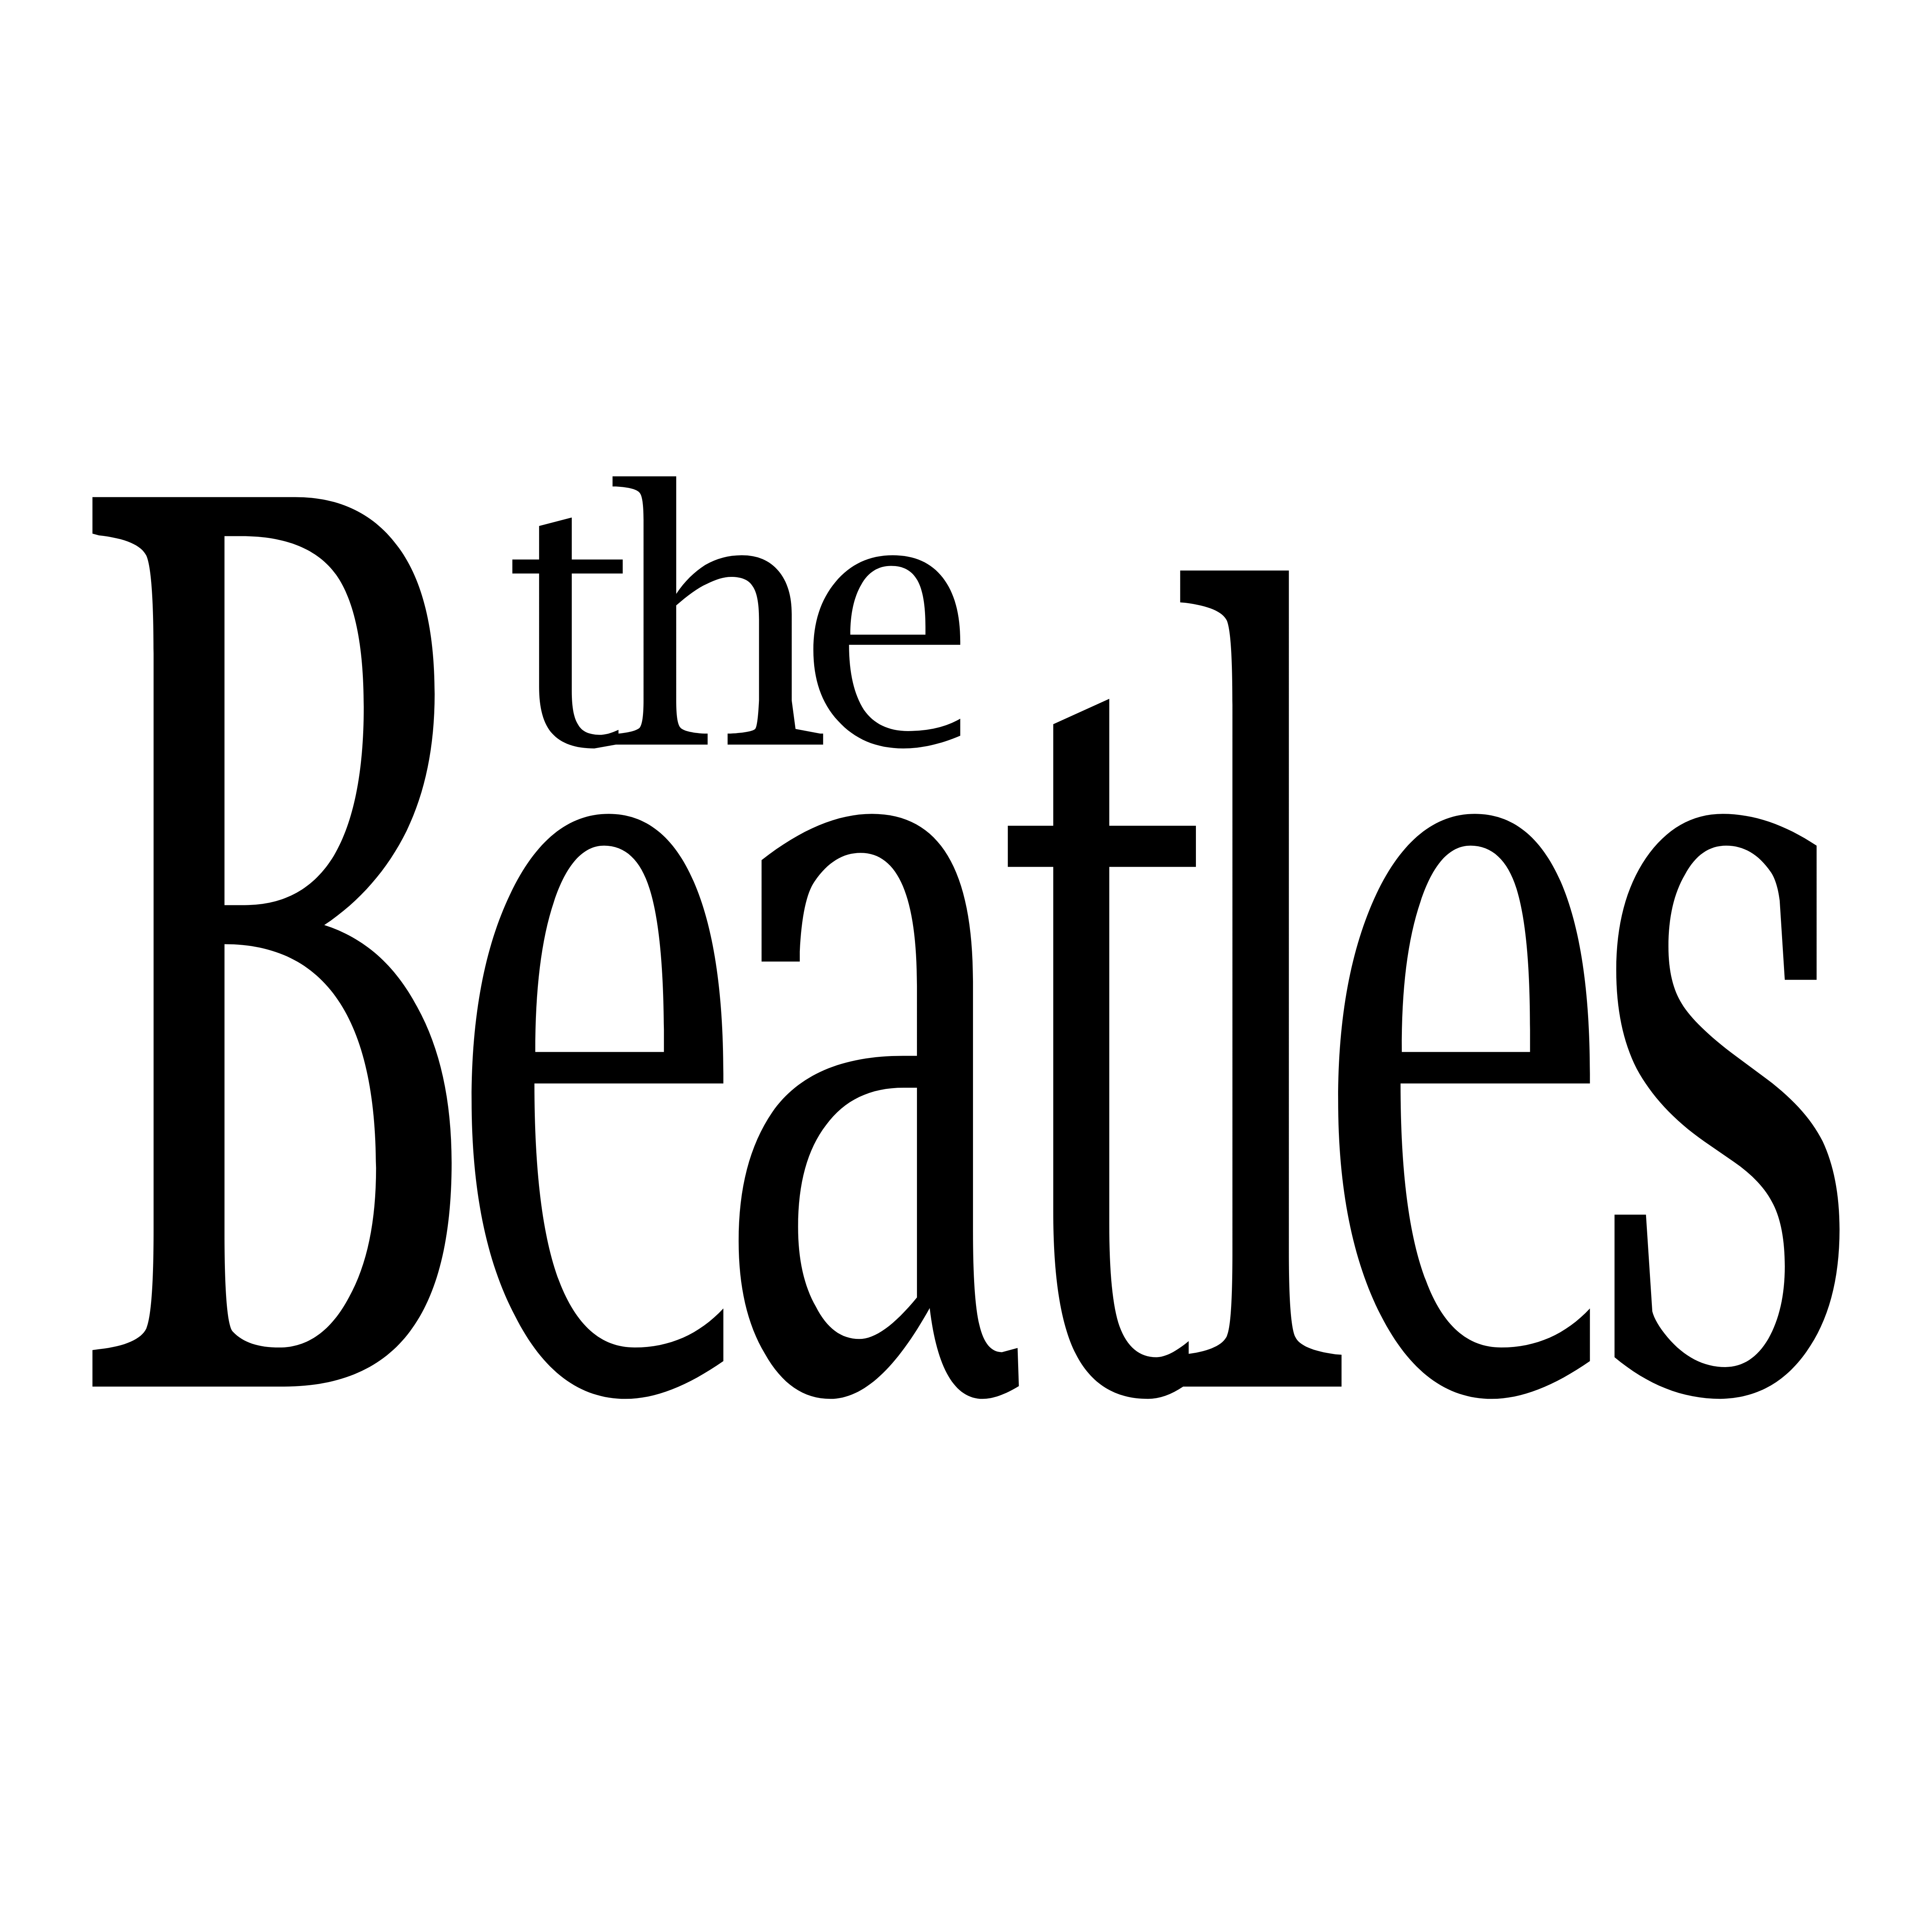 The Beatles Logo PNG - 180869